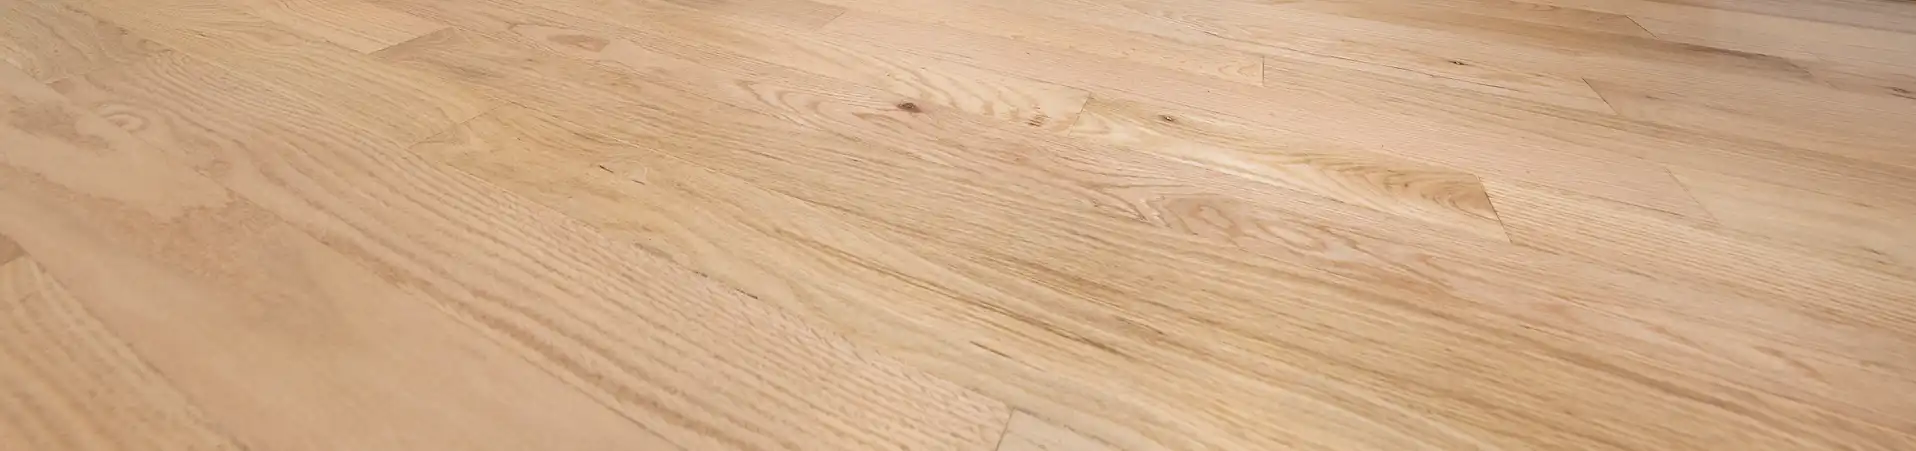 Photo of clean refinished wood floor